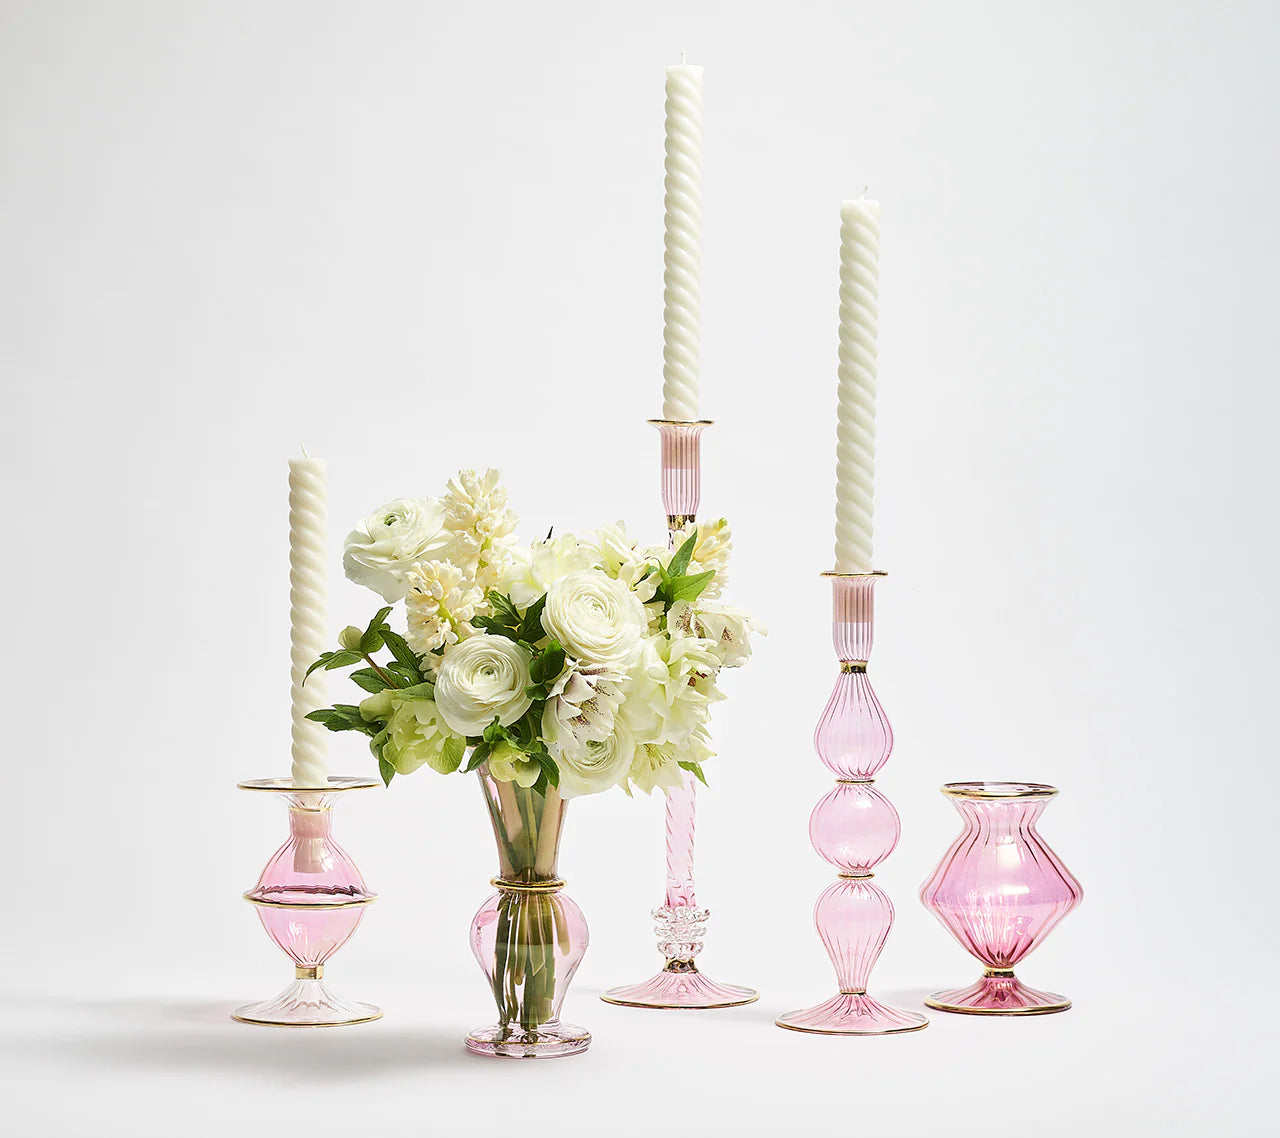 Scallop Bud Vase in Pink